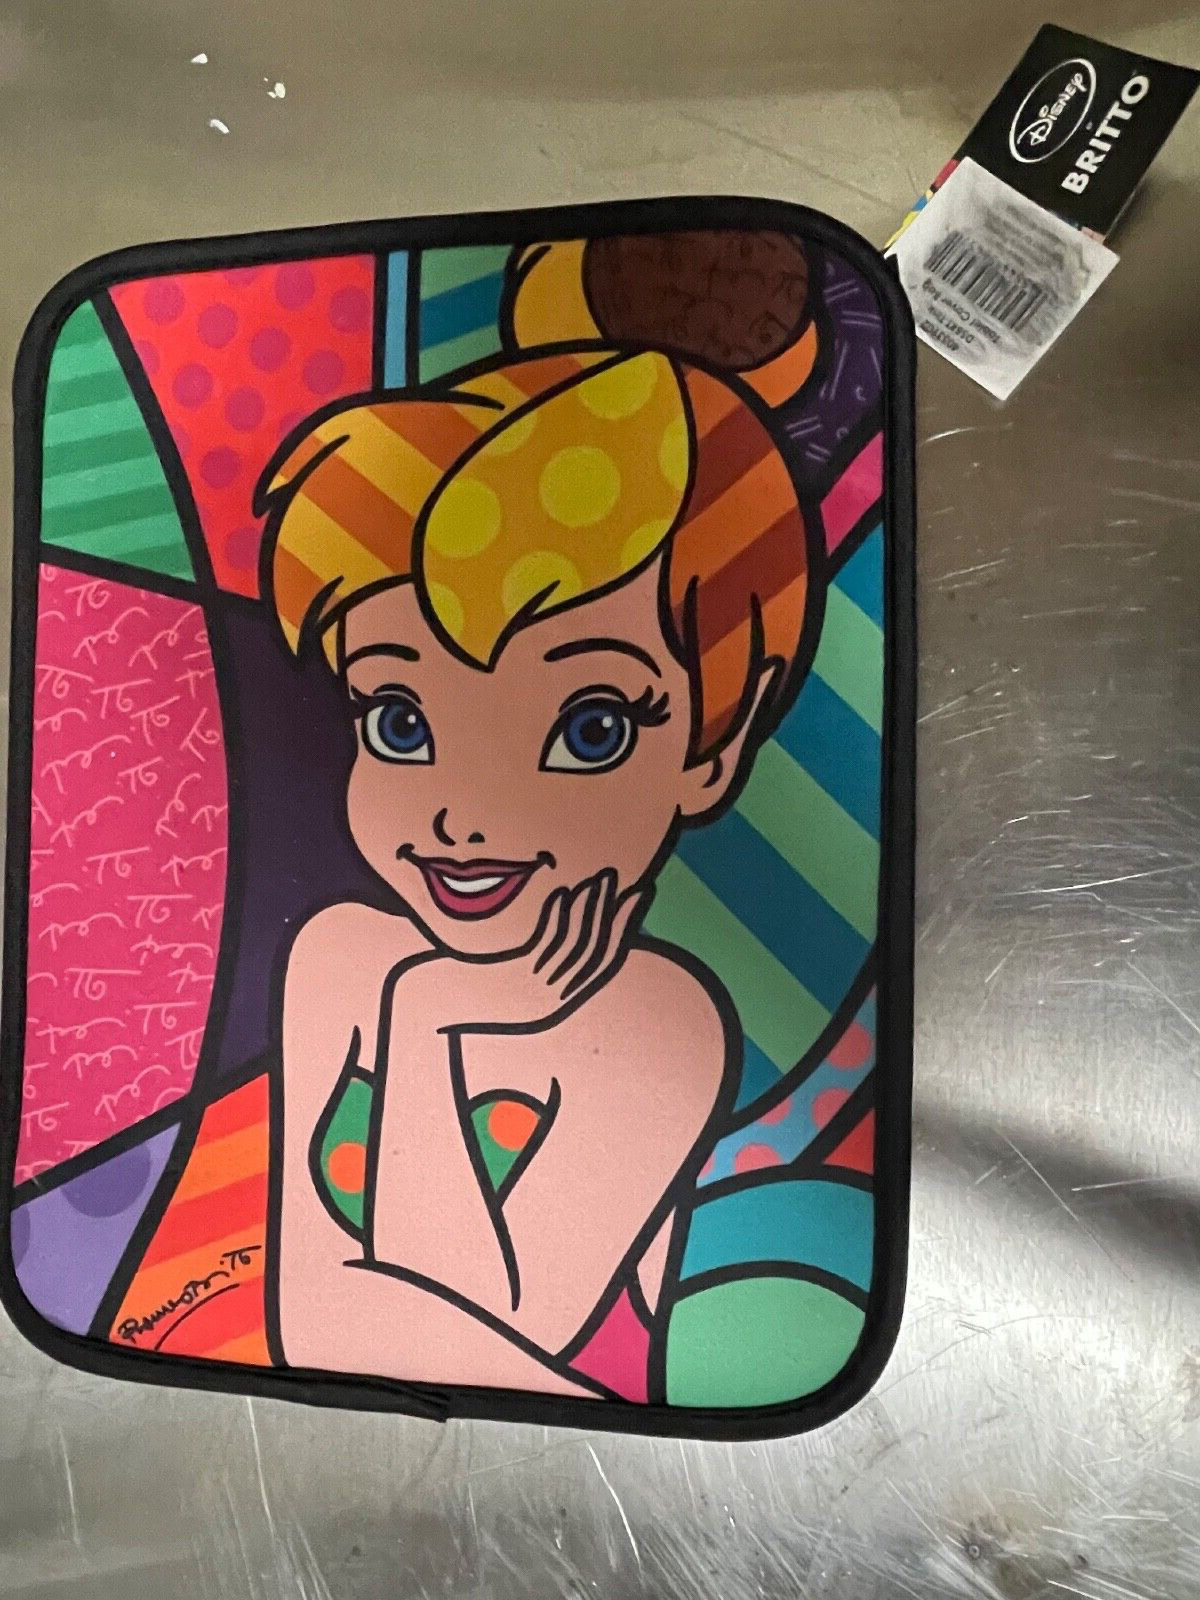 ROMERO BRITTO DISNEY TINKER BELL  TABLET CASE  COVER SLEEVE  ** NEW ** 